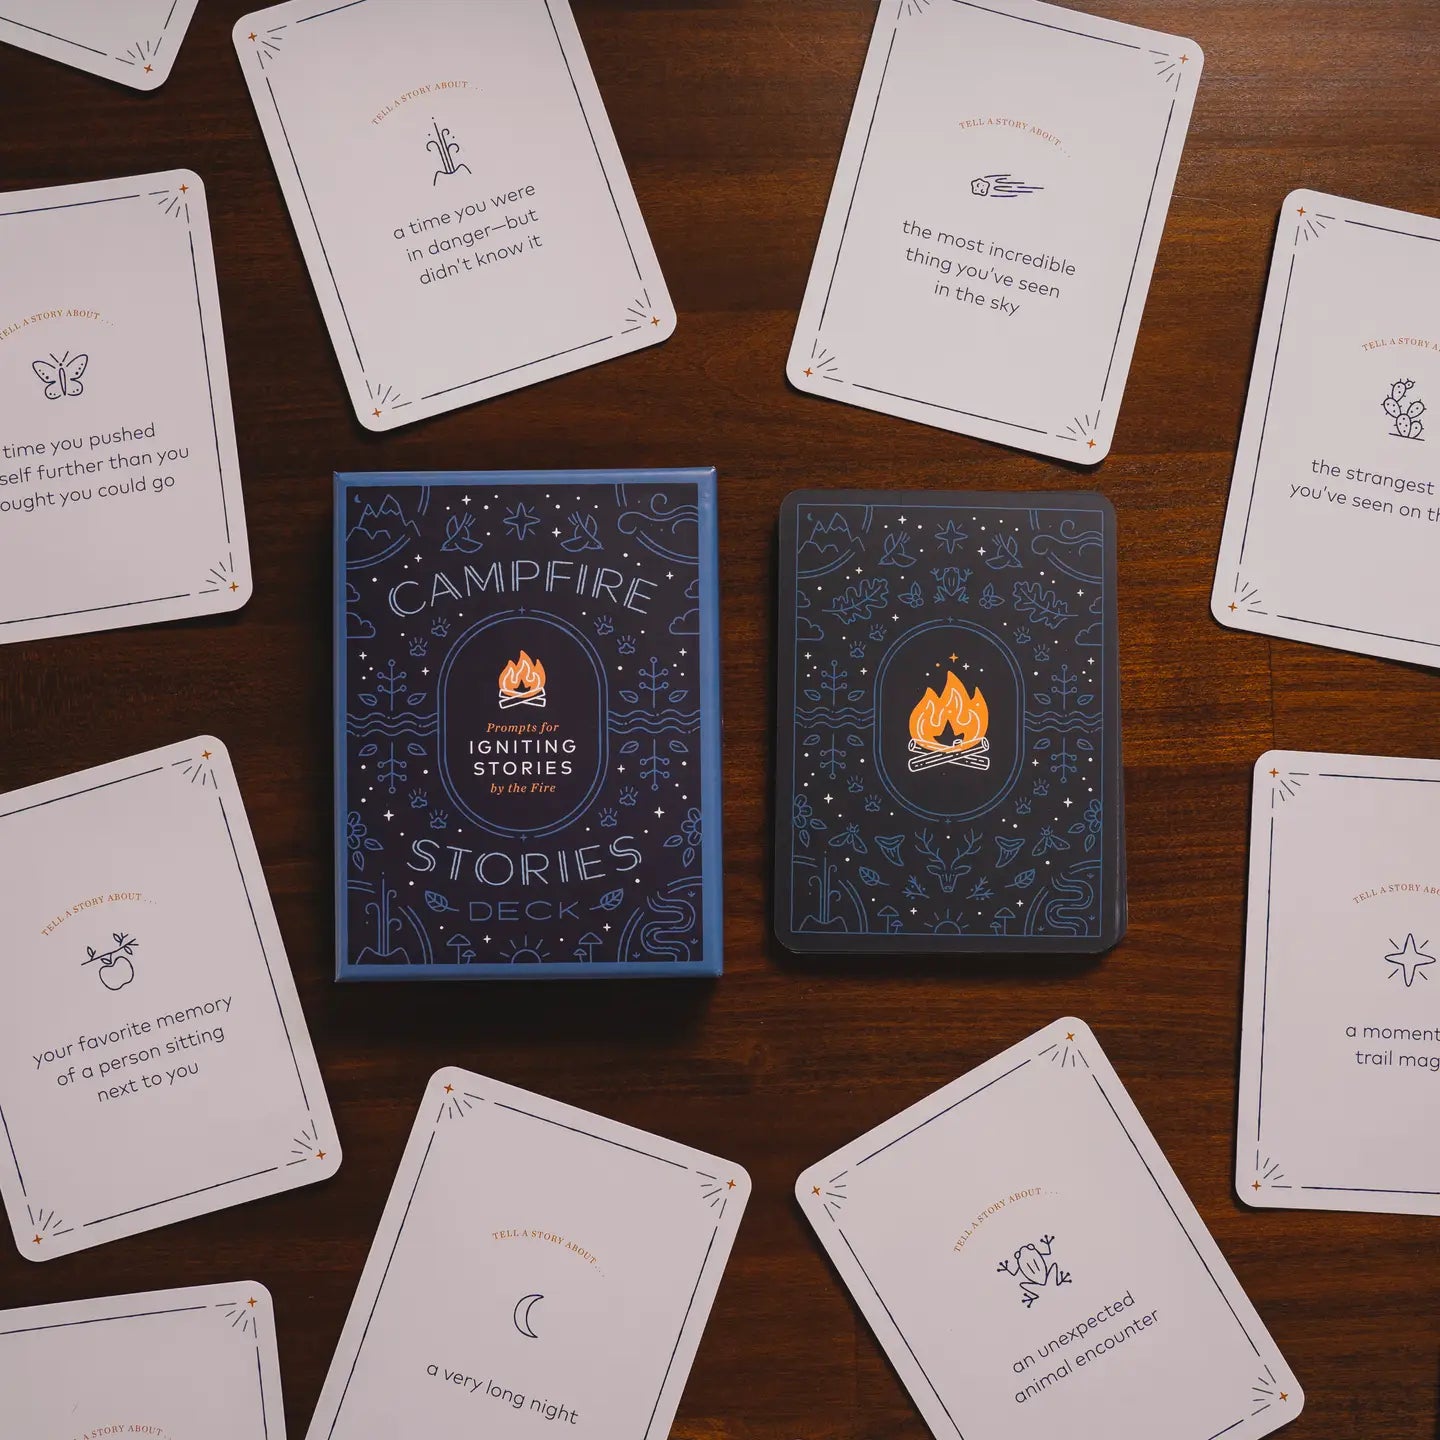 Campfire Stories Deck (Prompts For Igniting Stories)